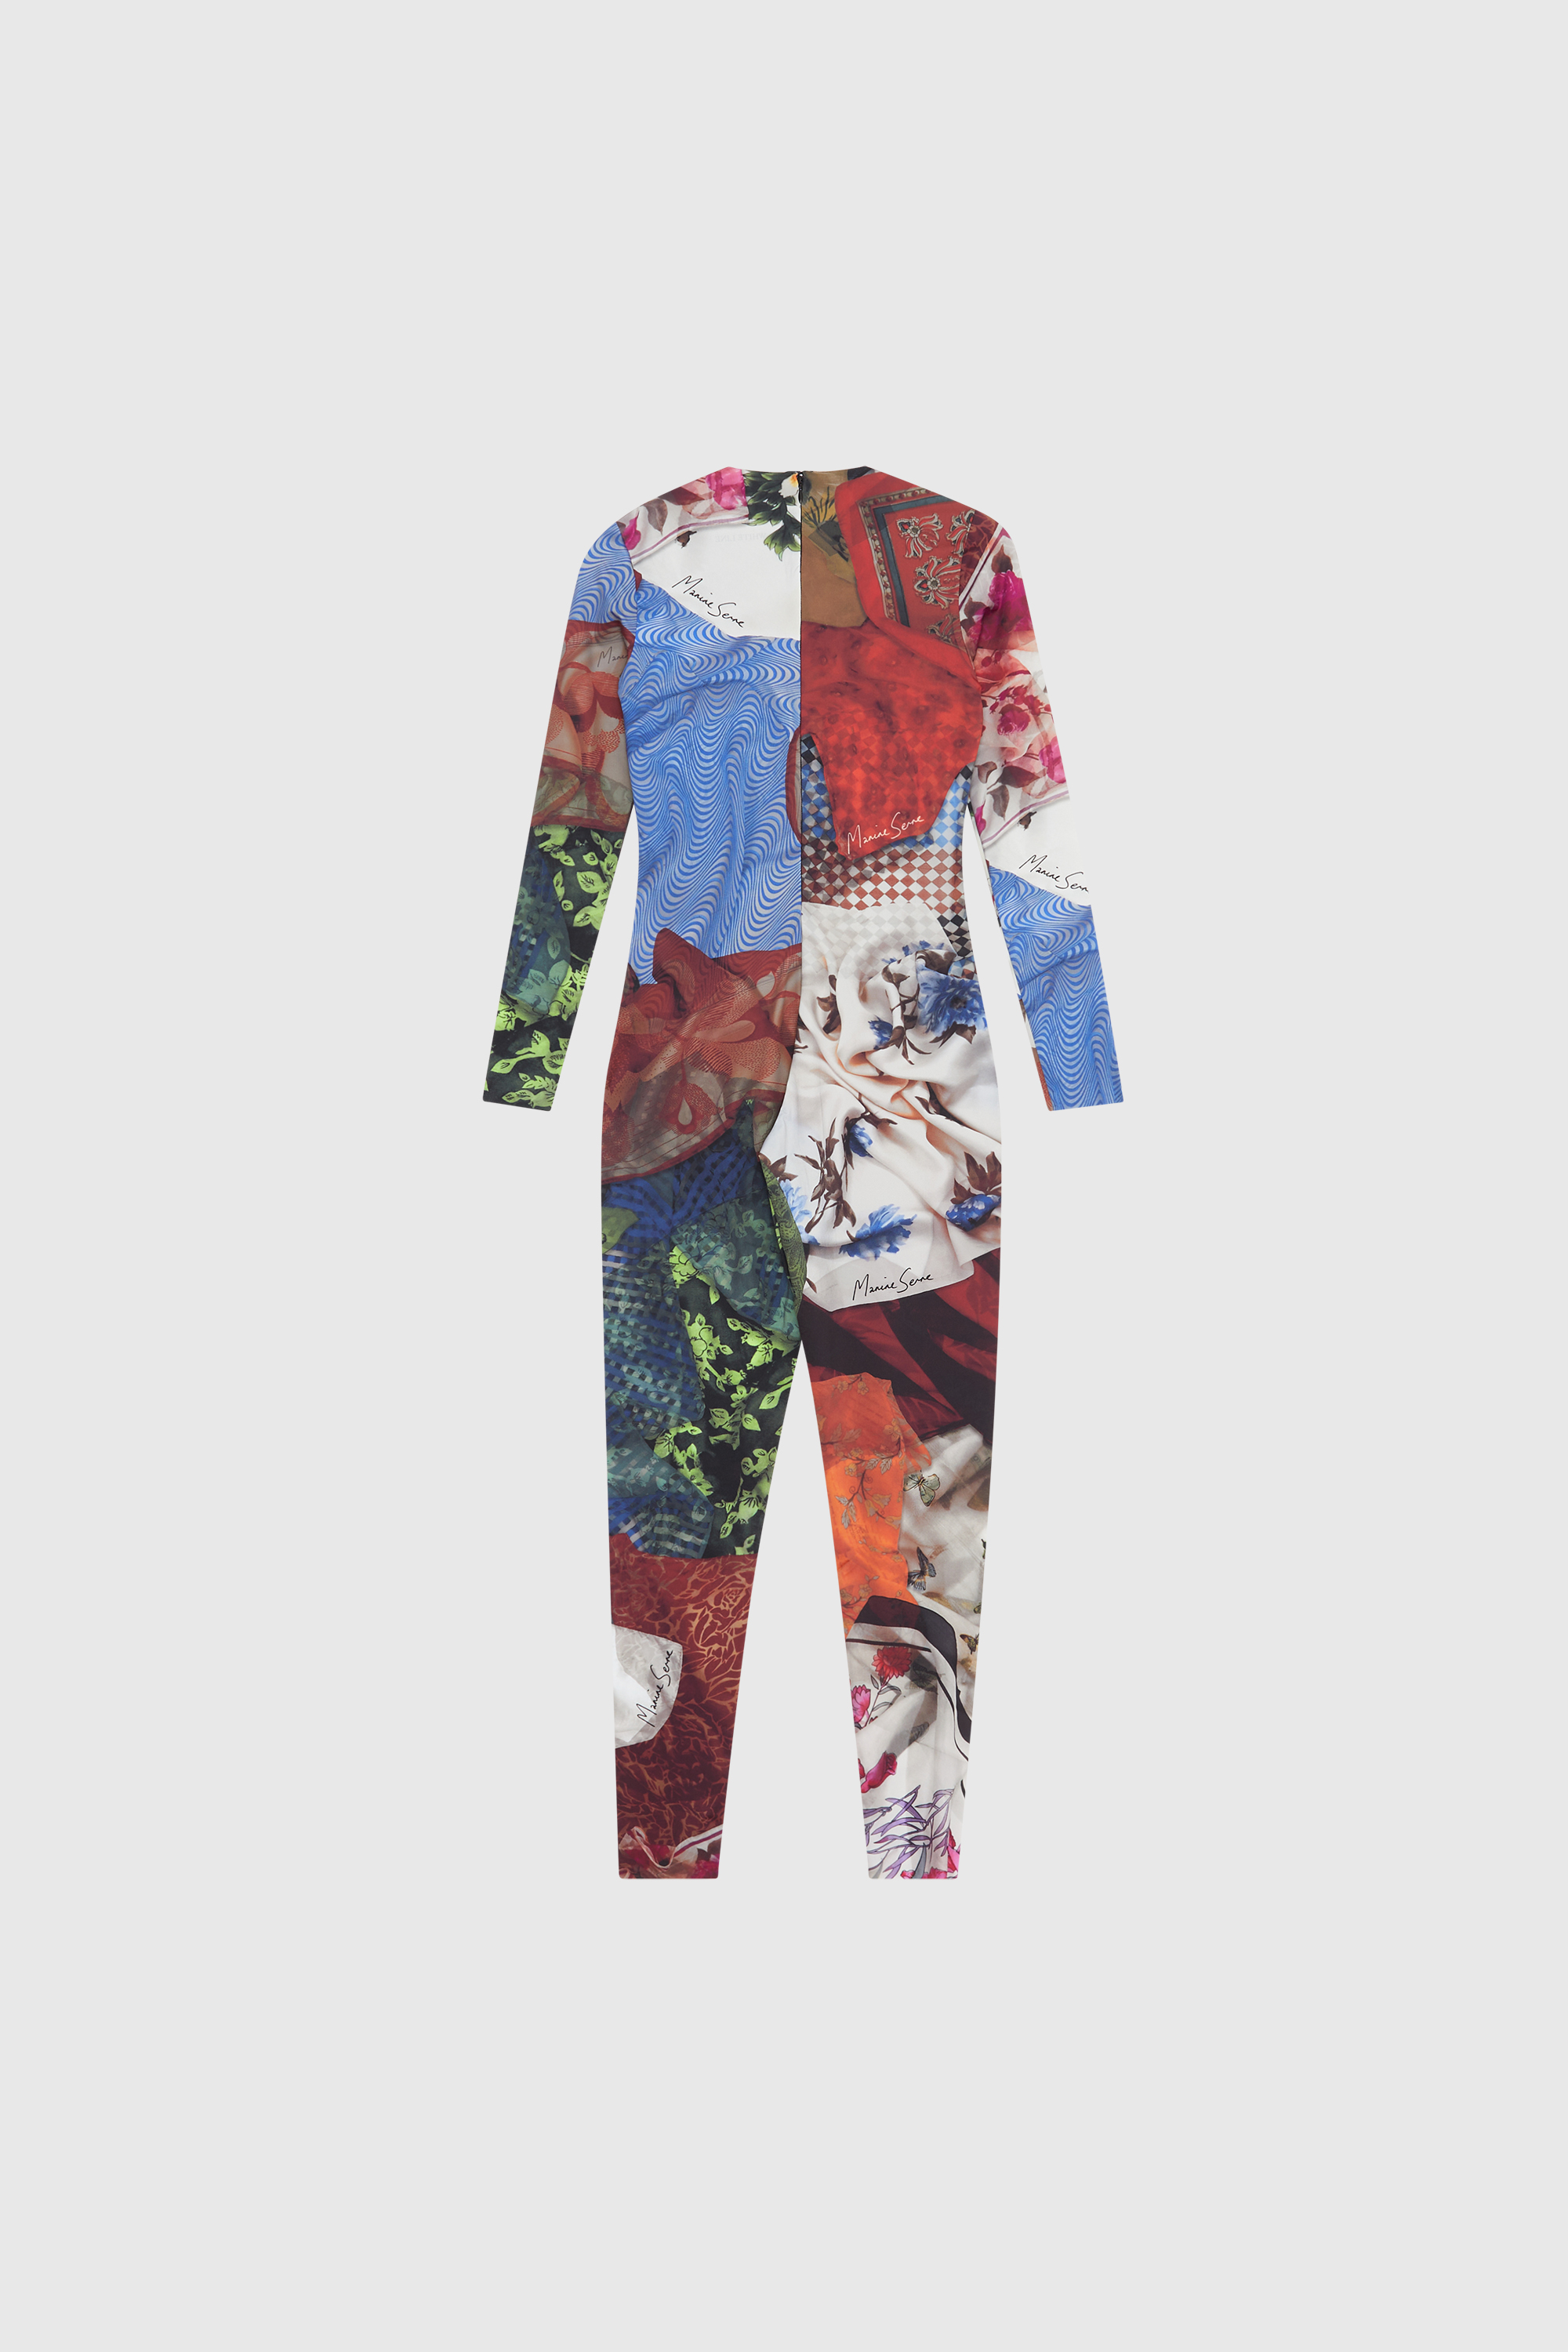 Marine Serre Scarves Print Recycled Jersey Catsuit Mu00 | WoodWood.com